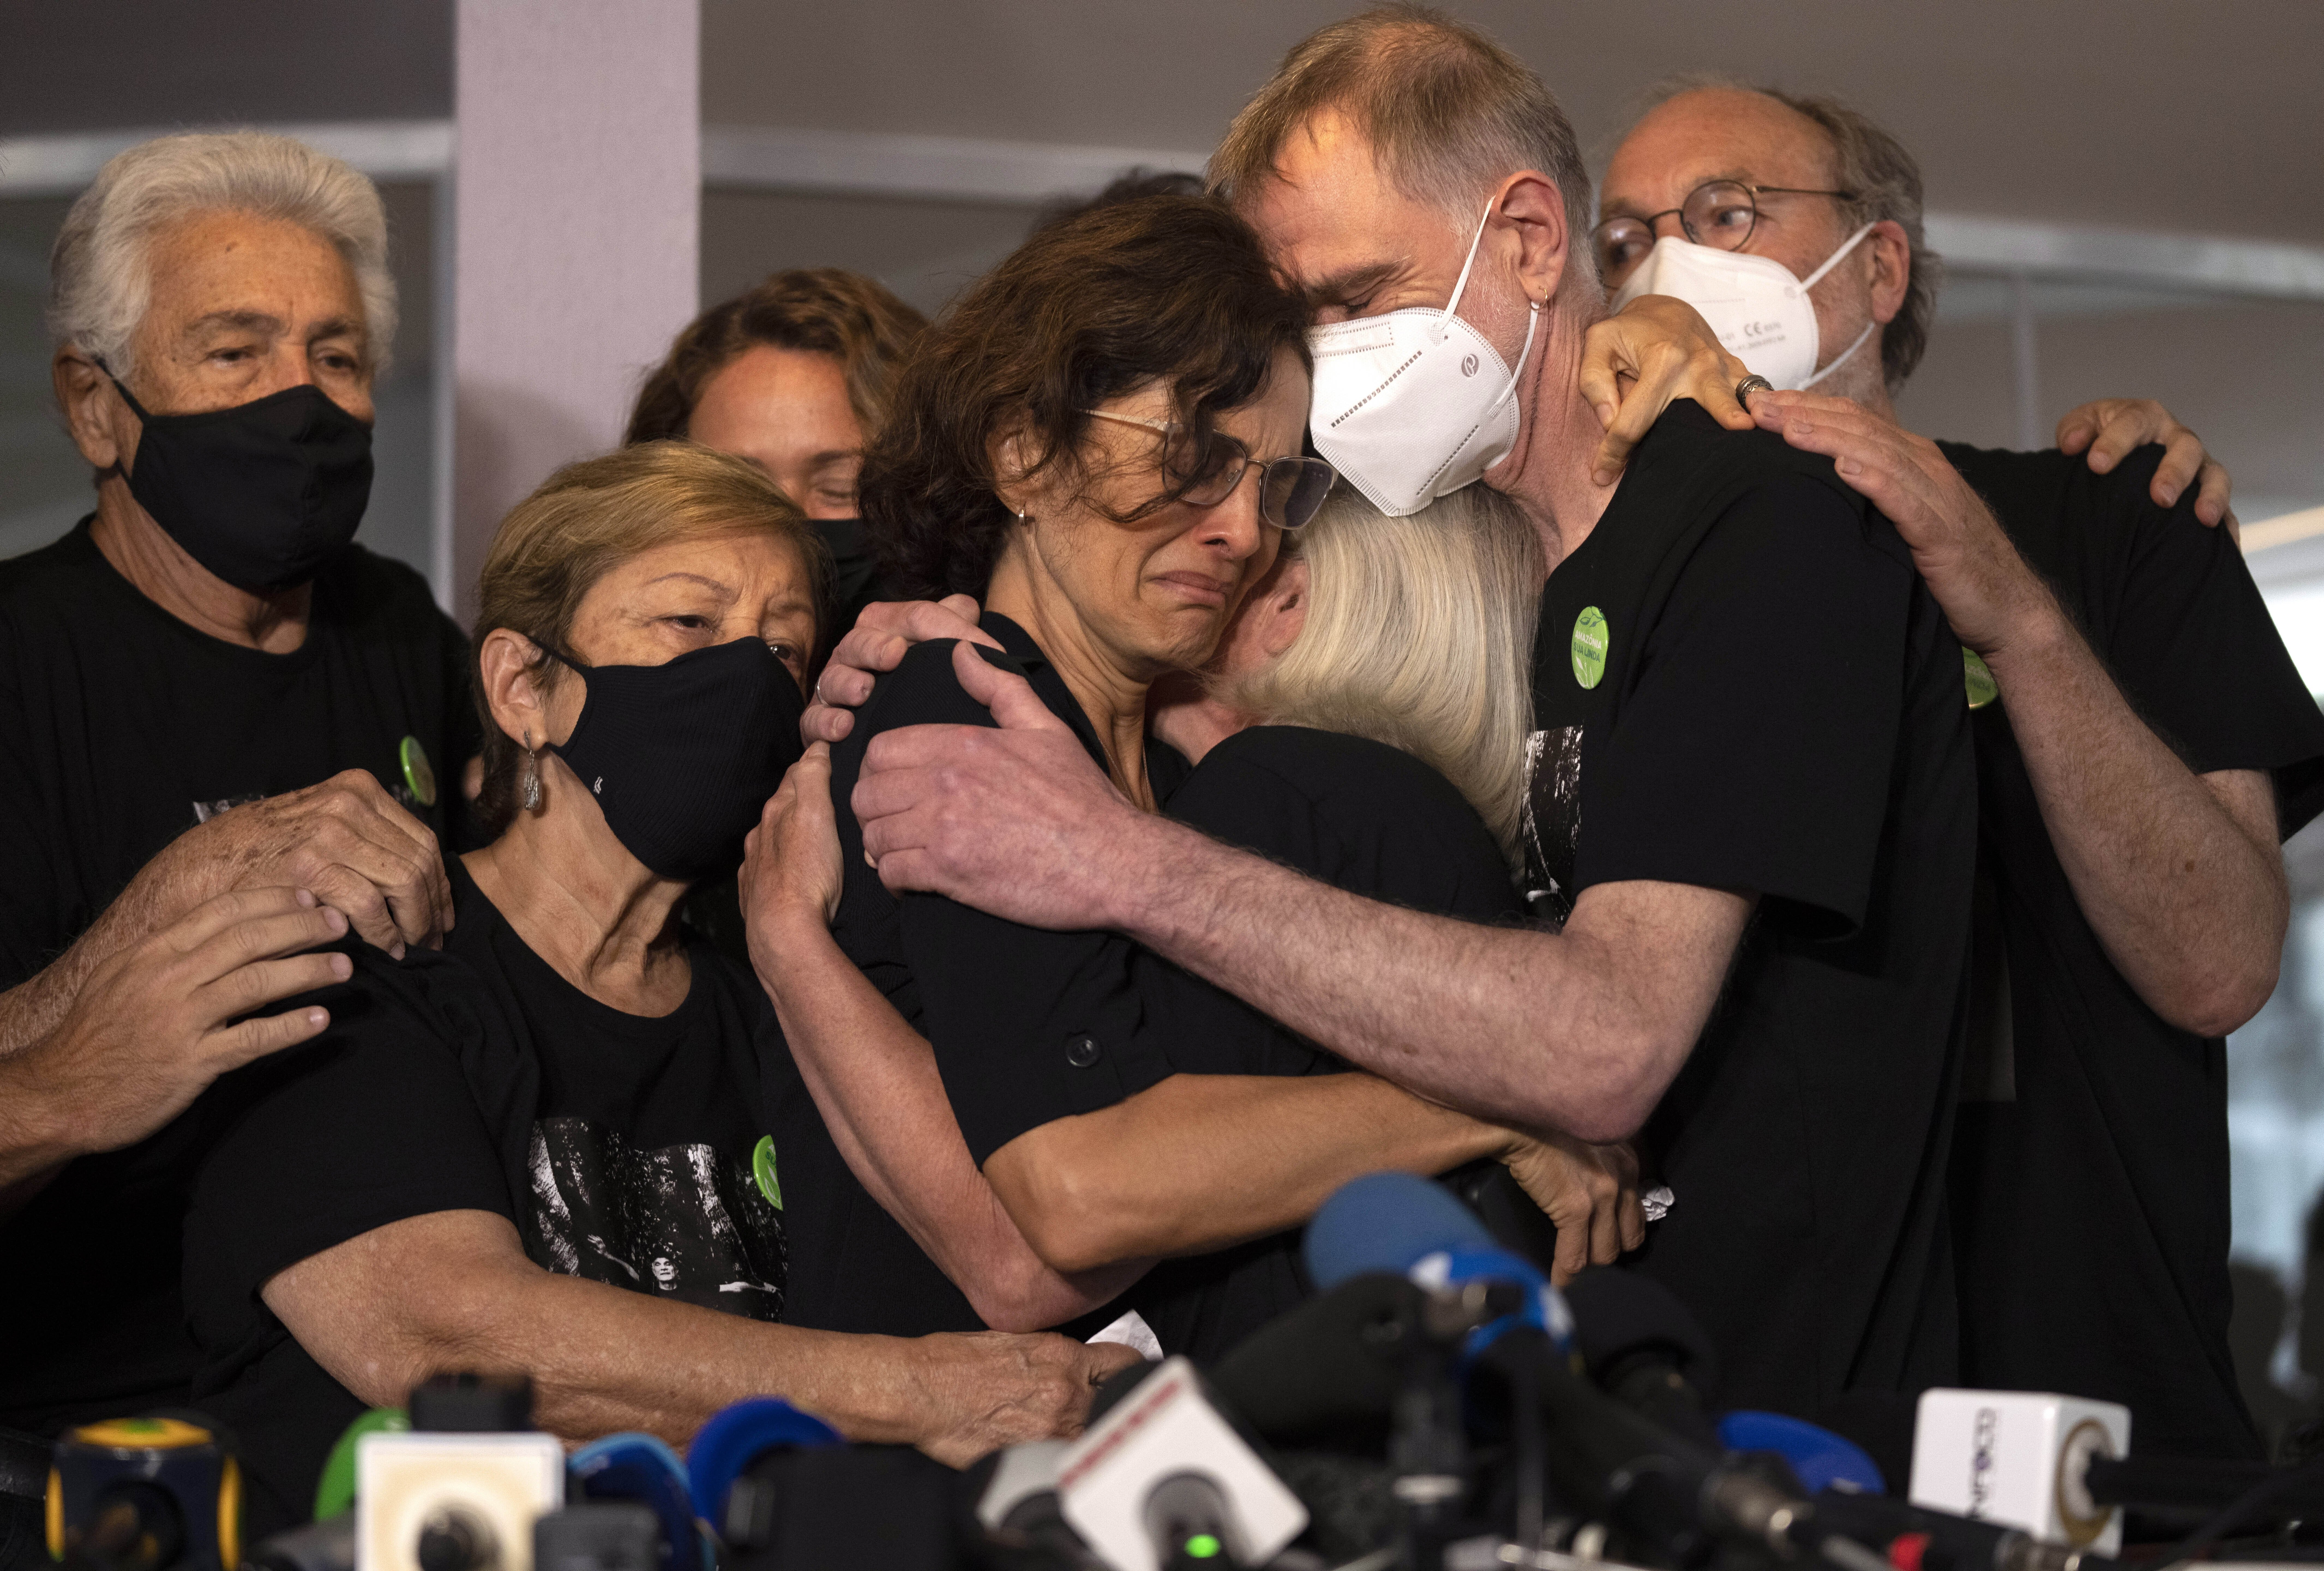 Relatives mourn as Alessandra Sampaio (C) embraces her sister-in-law Sian Phillips after speaking to the media during the funeral of her husband British journalist Dom Phillips at the Parque da Colina cemetery in Niteroi, Brazil, June 26, 2022. (AP Photo/Silvia Izquierdo)